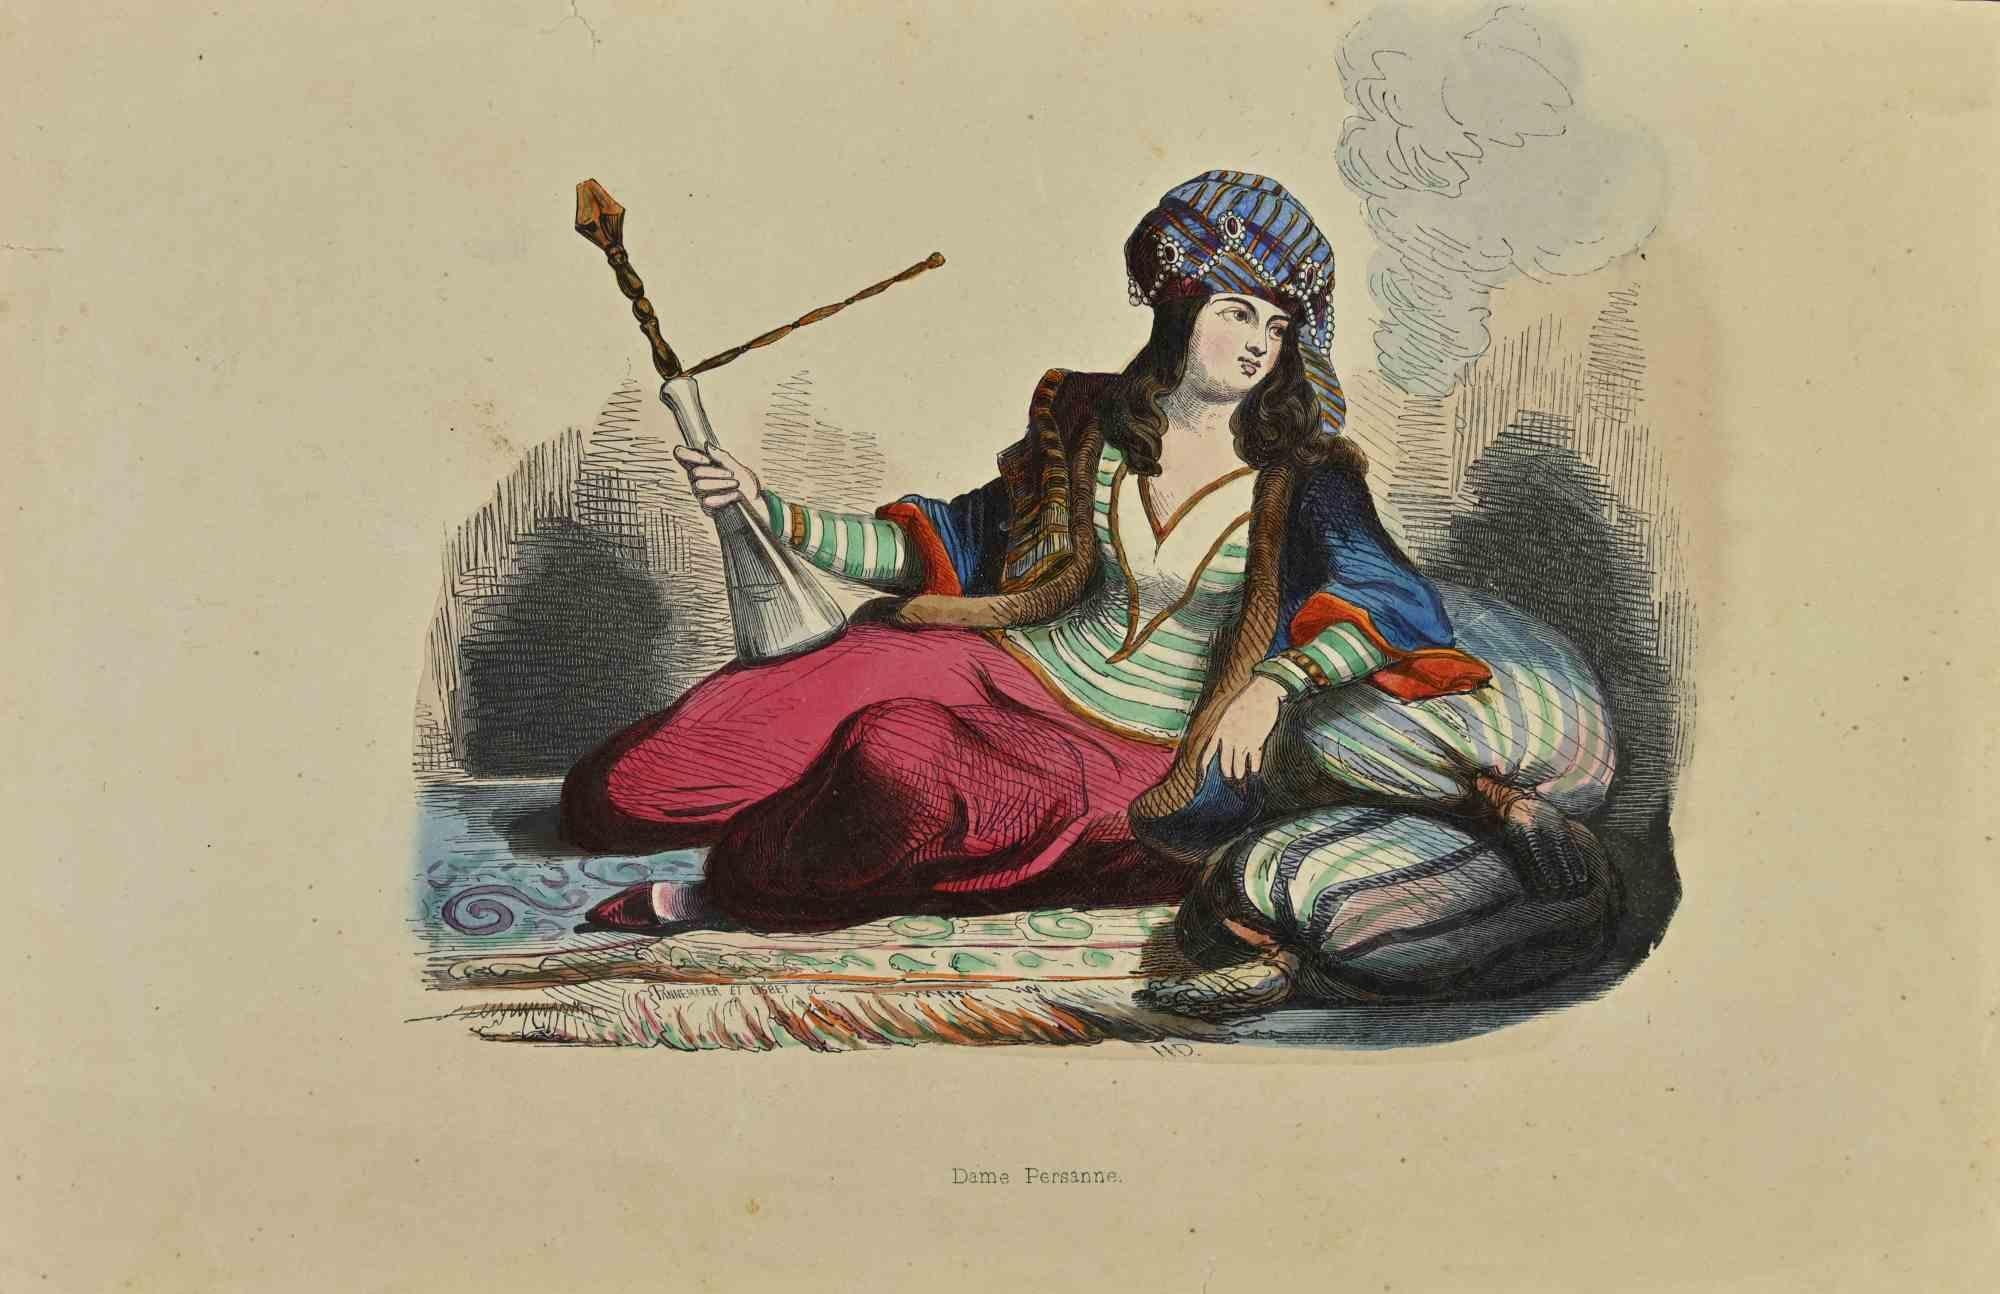 Persian Lady is a lithograph made by Auguste Wahlen in 1844.

Hand colored.

Good condition.

At the center of the artwork is the original title "Dame Persanne".

The work is part of Suite Moeurs, usages et costumes de tous les peuples du monde,